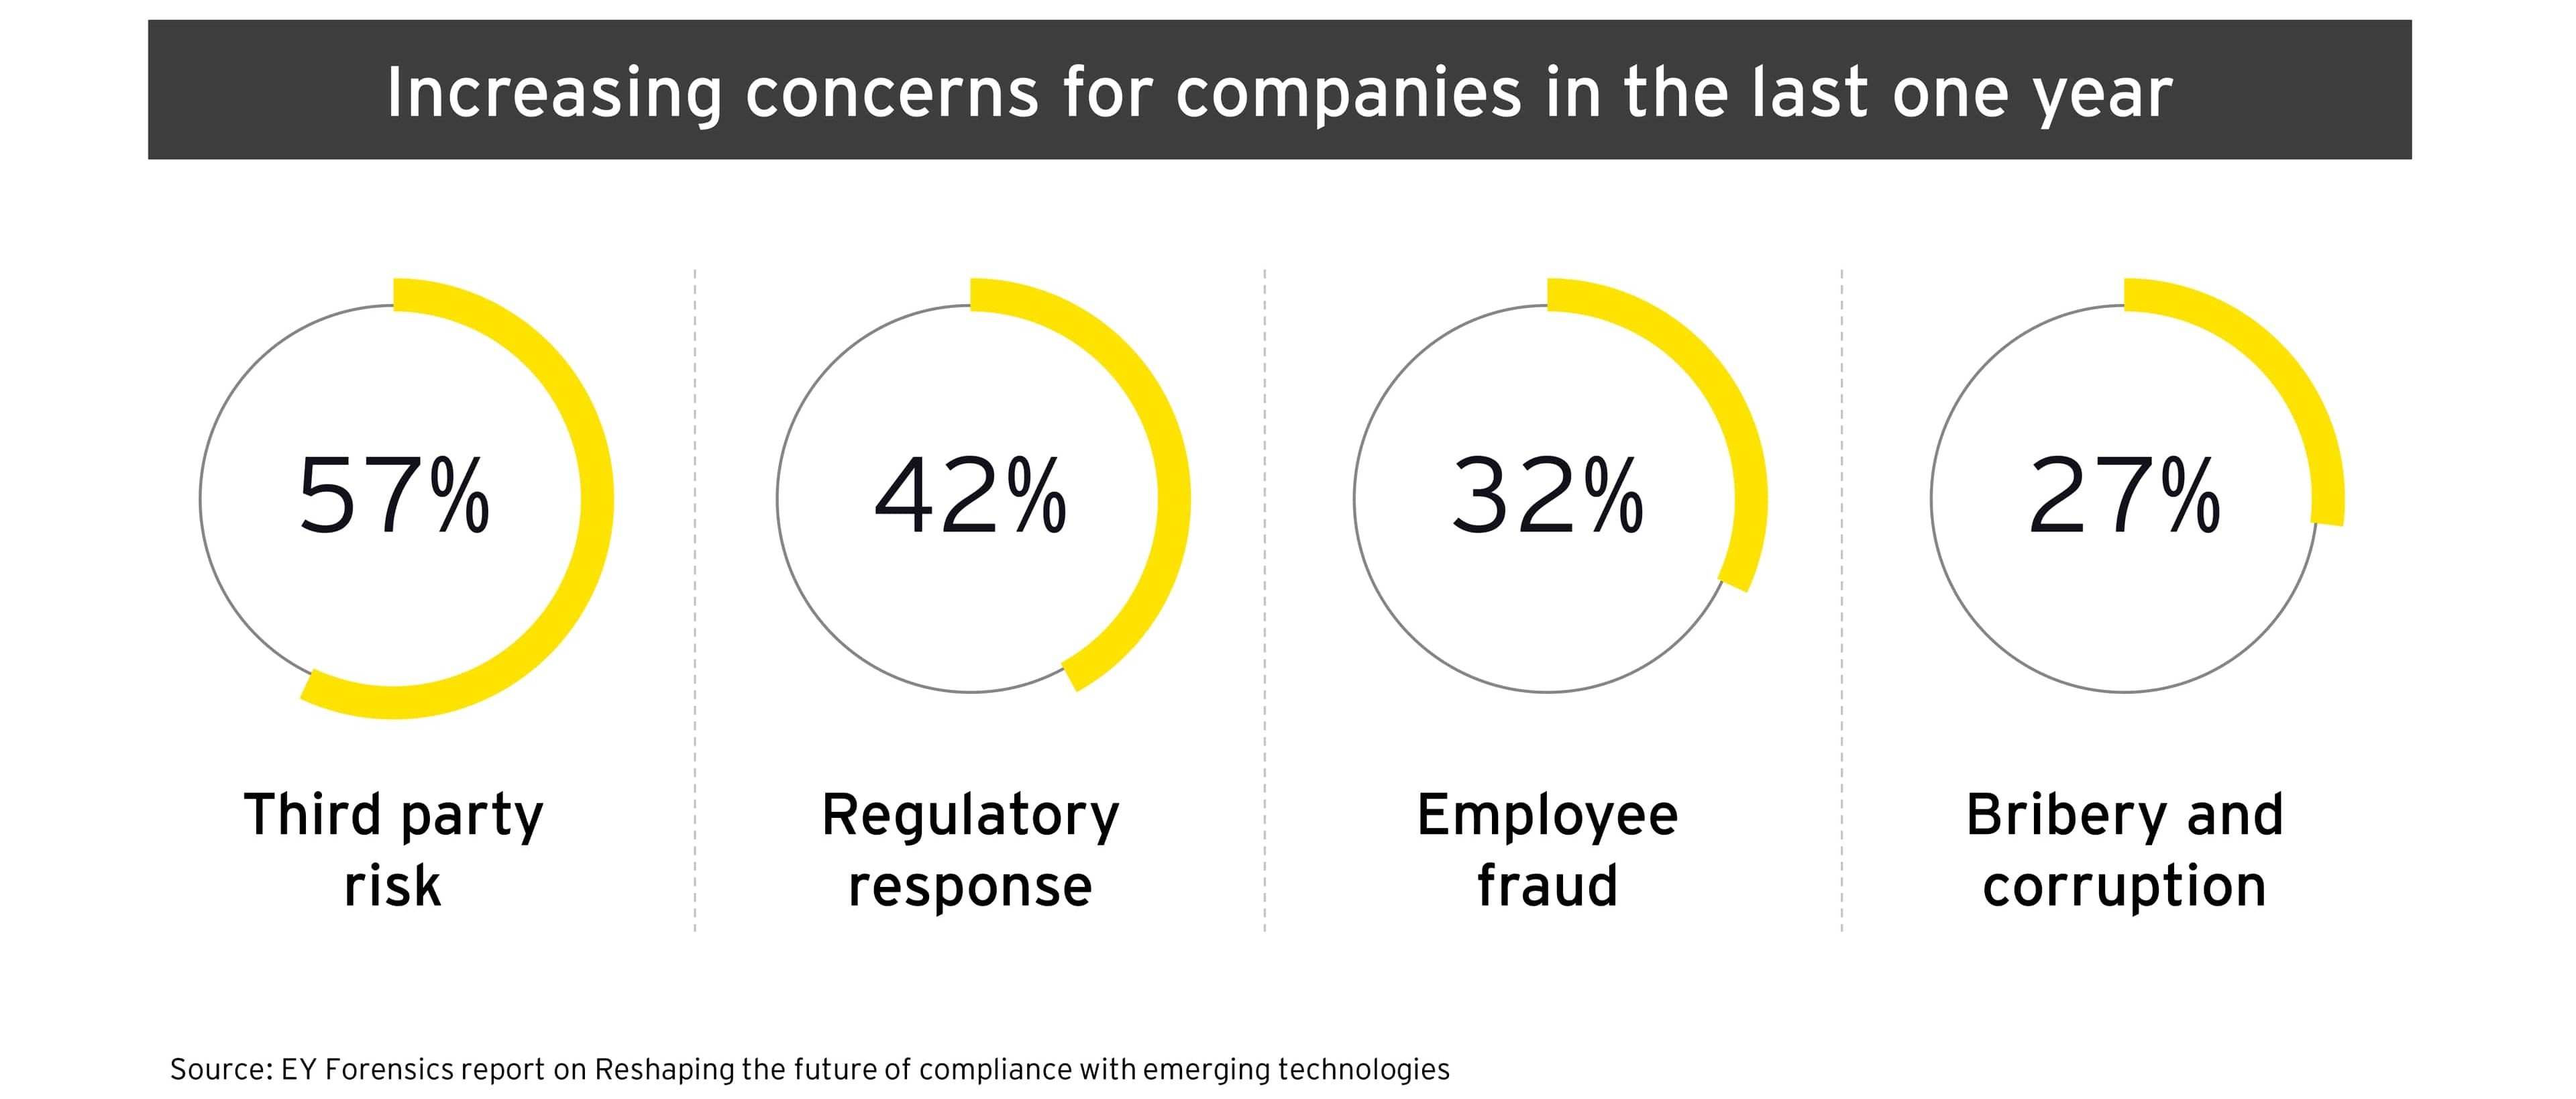 EY Forensics report on reshaping the future of compliance